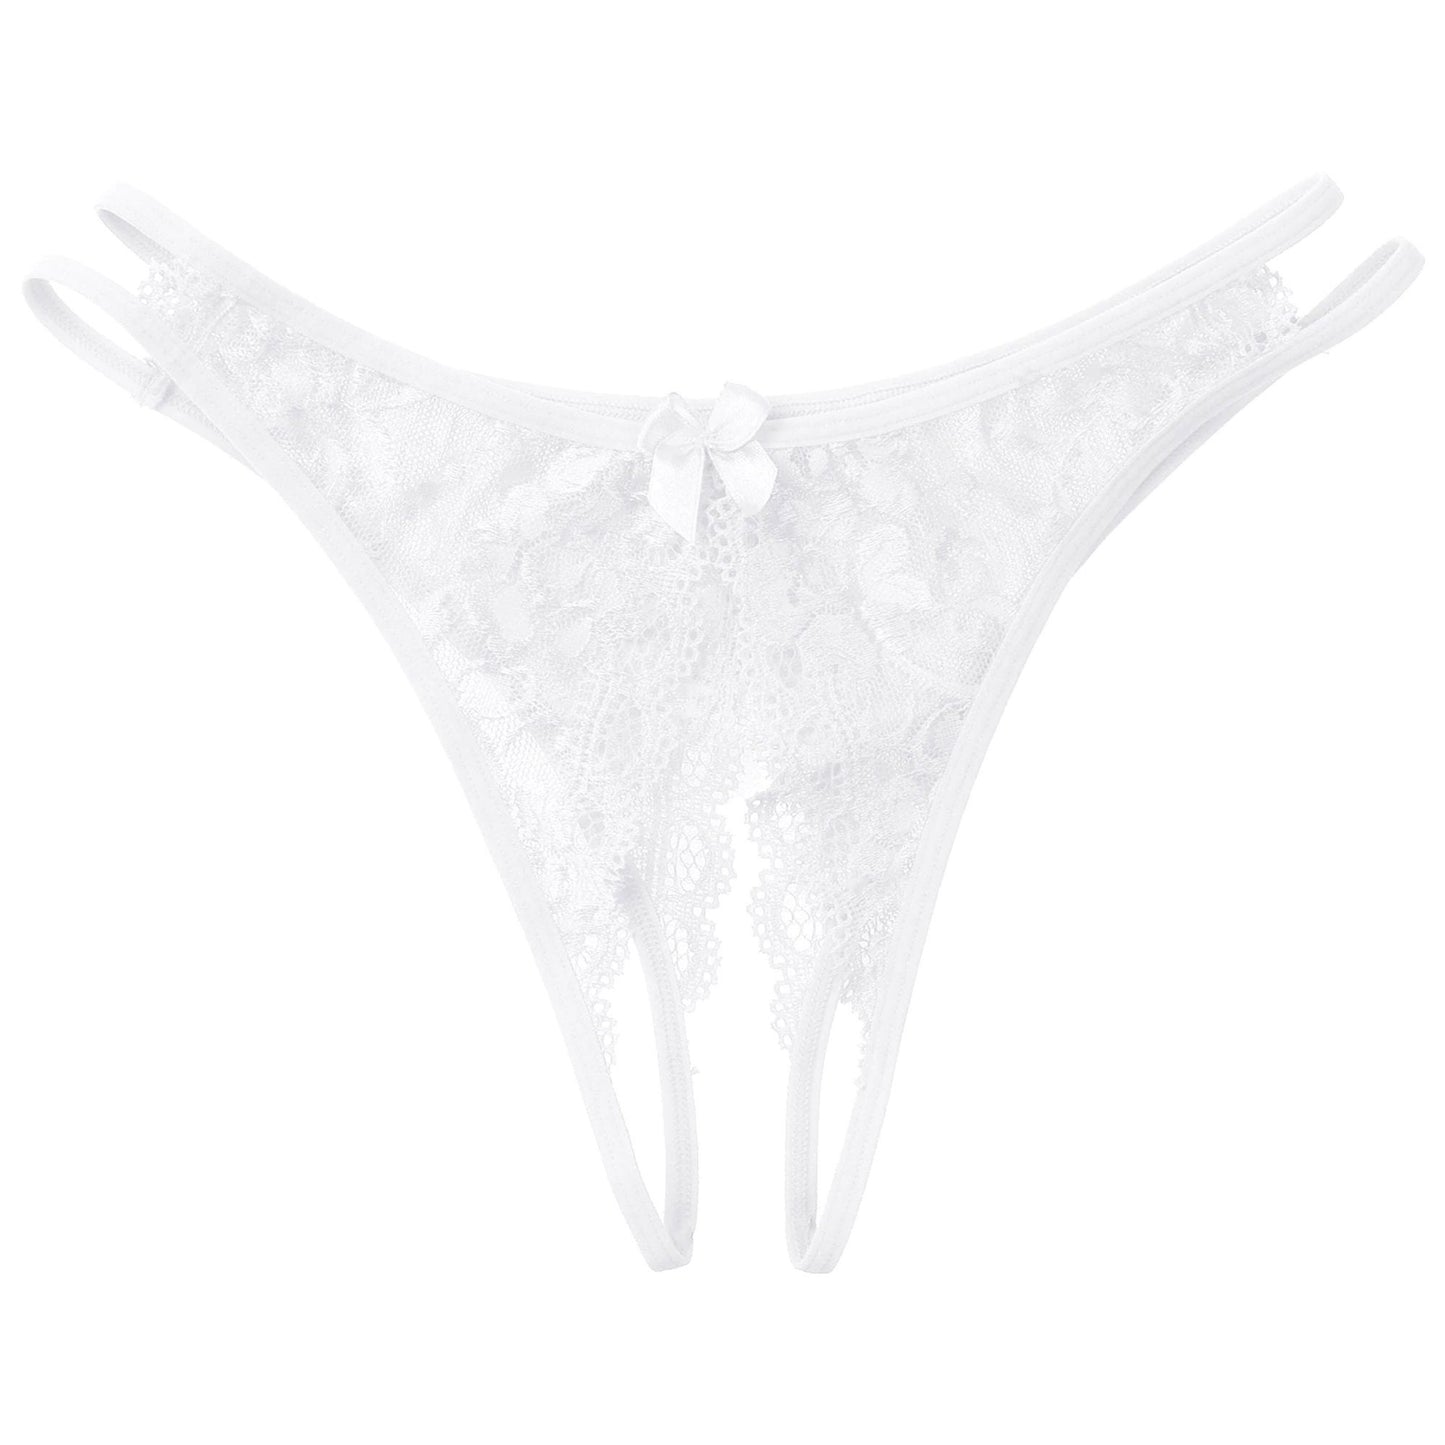 Men's Erotic See Through Lace Crotchless Panty